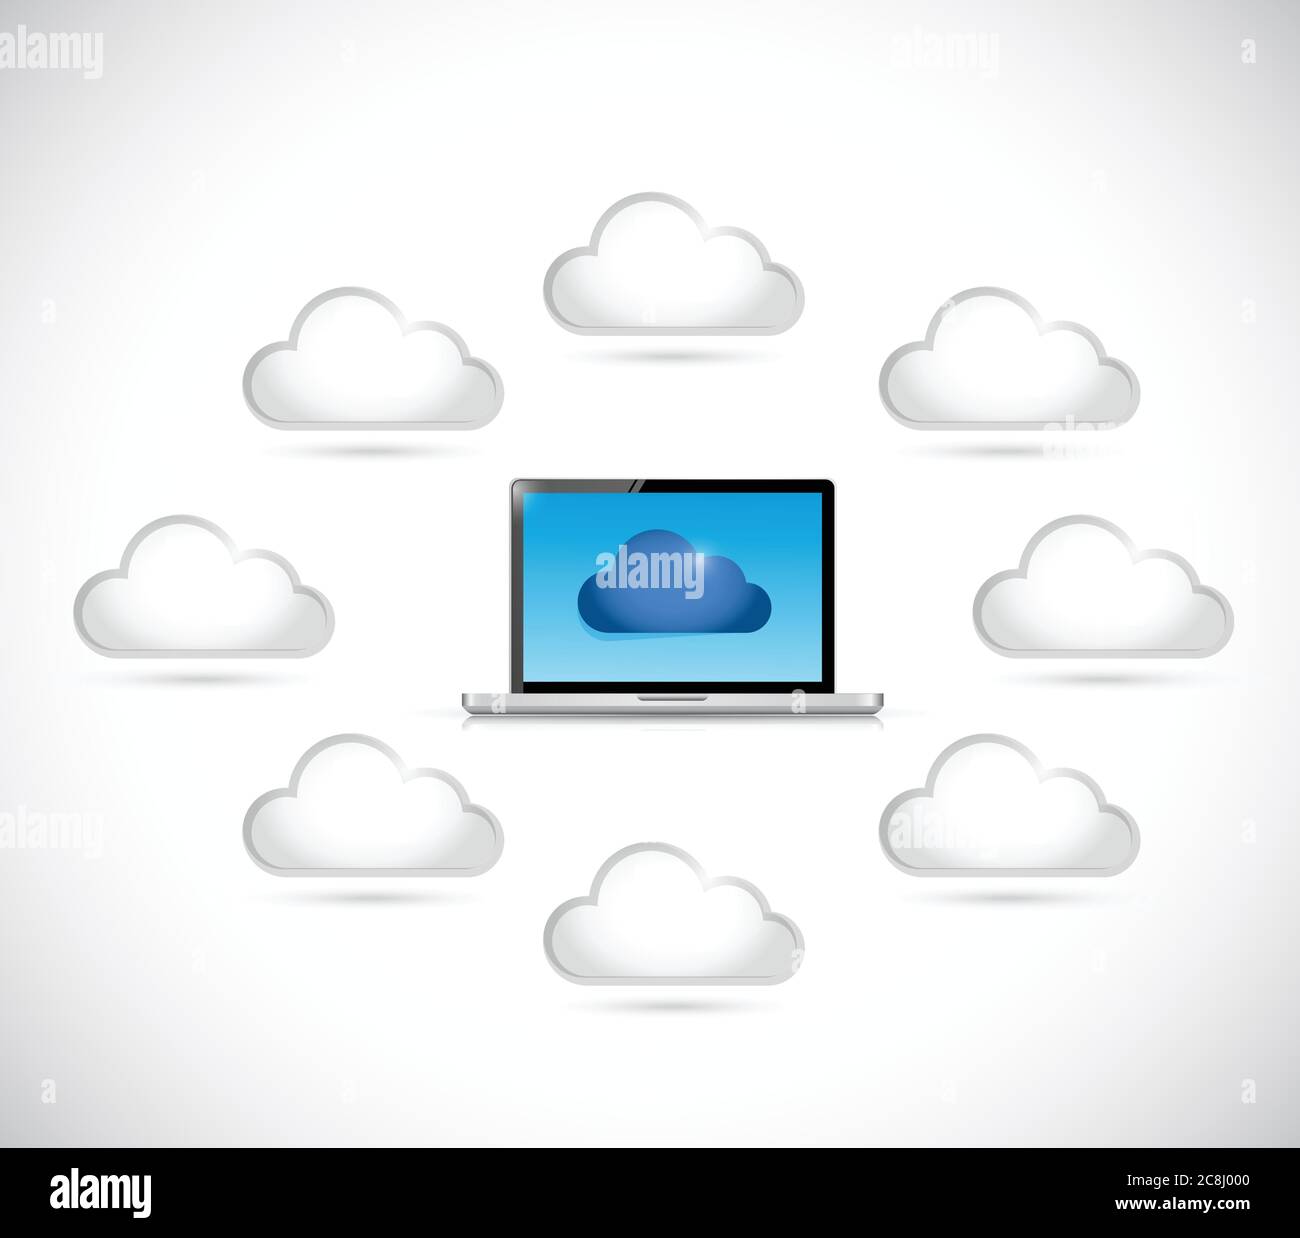 White clouds around a laptop illustration design over a white background Stock Vector